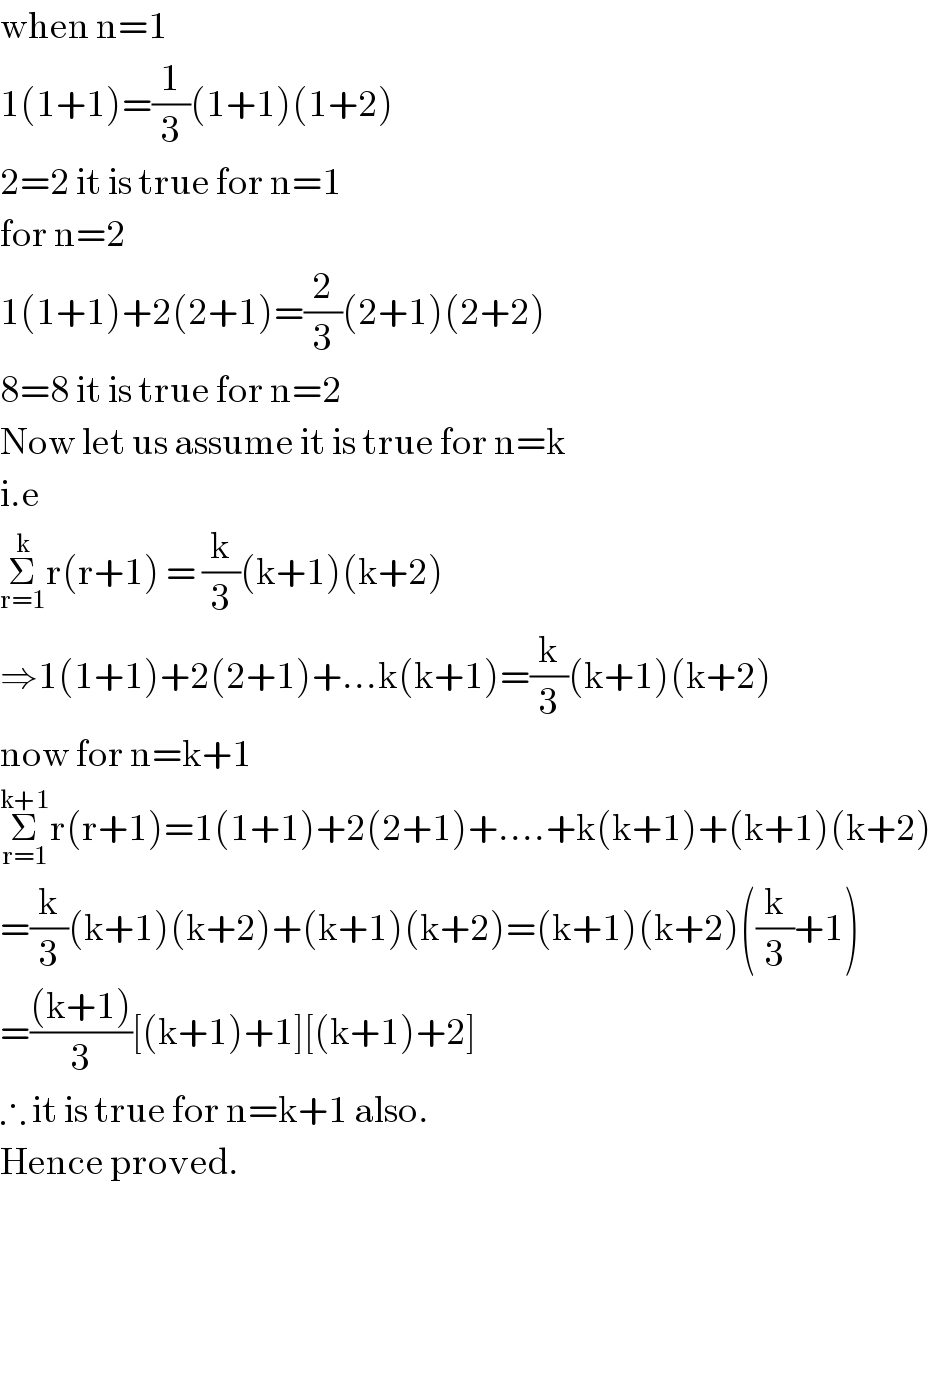 when n=1  1(1+1)=(1/3)(1+1)(1+2)  2=2 it is true for n=1  for n=2  1(1+1)+2(2+1)=(2/3)(2+1)(2+2)  8=8 it is true for n=2  Now let us assume it is true for n=k  i.e  Σ_(r=1) ^k r(r+1) = (k/3)(k+1)(k+2)  ⇒1(1+1)+2(2+1)+...k(k+1)=(k/3)(k+1)(k+2)  now for n=k+1  Σ_(r=1) ^(k+1) r(r+1)=1(1+1)+2(2+1)+....+k(k+1)+(k+1)(k+2)  =(k/3)(k+1)(k+2)+(k+1)(k+2)=(k+1)(k+2)((k/3)+1)  =(((k+1))/3)[(k+1)+1][(k+1)+2]  ∴ it is true for n=k+1 also.  Hence proved.        